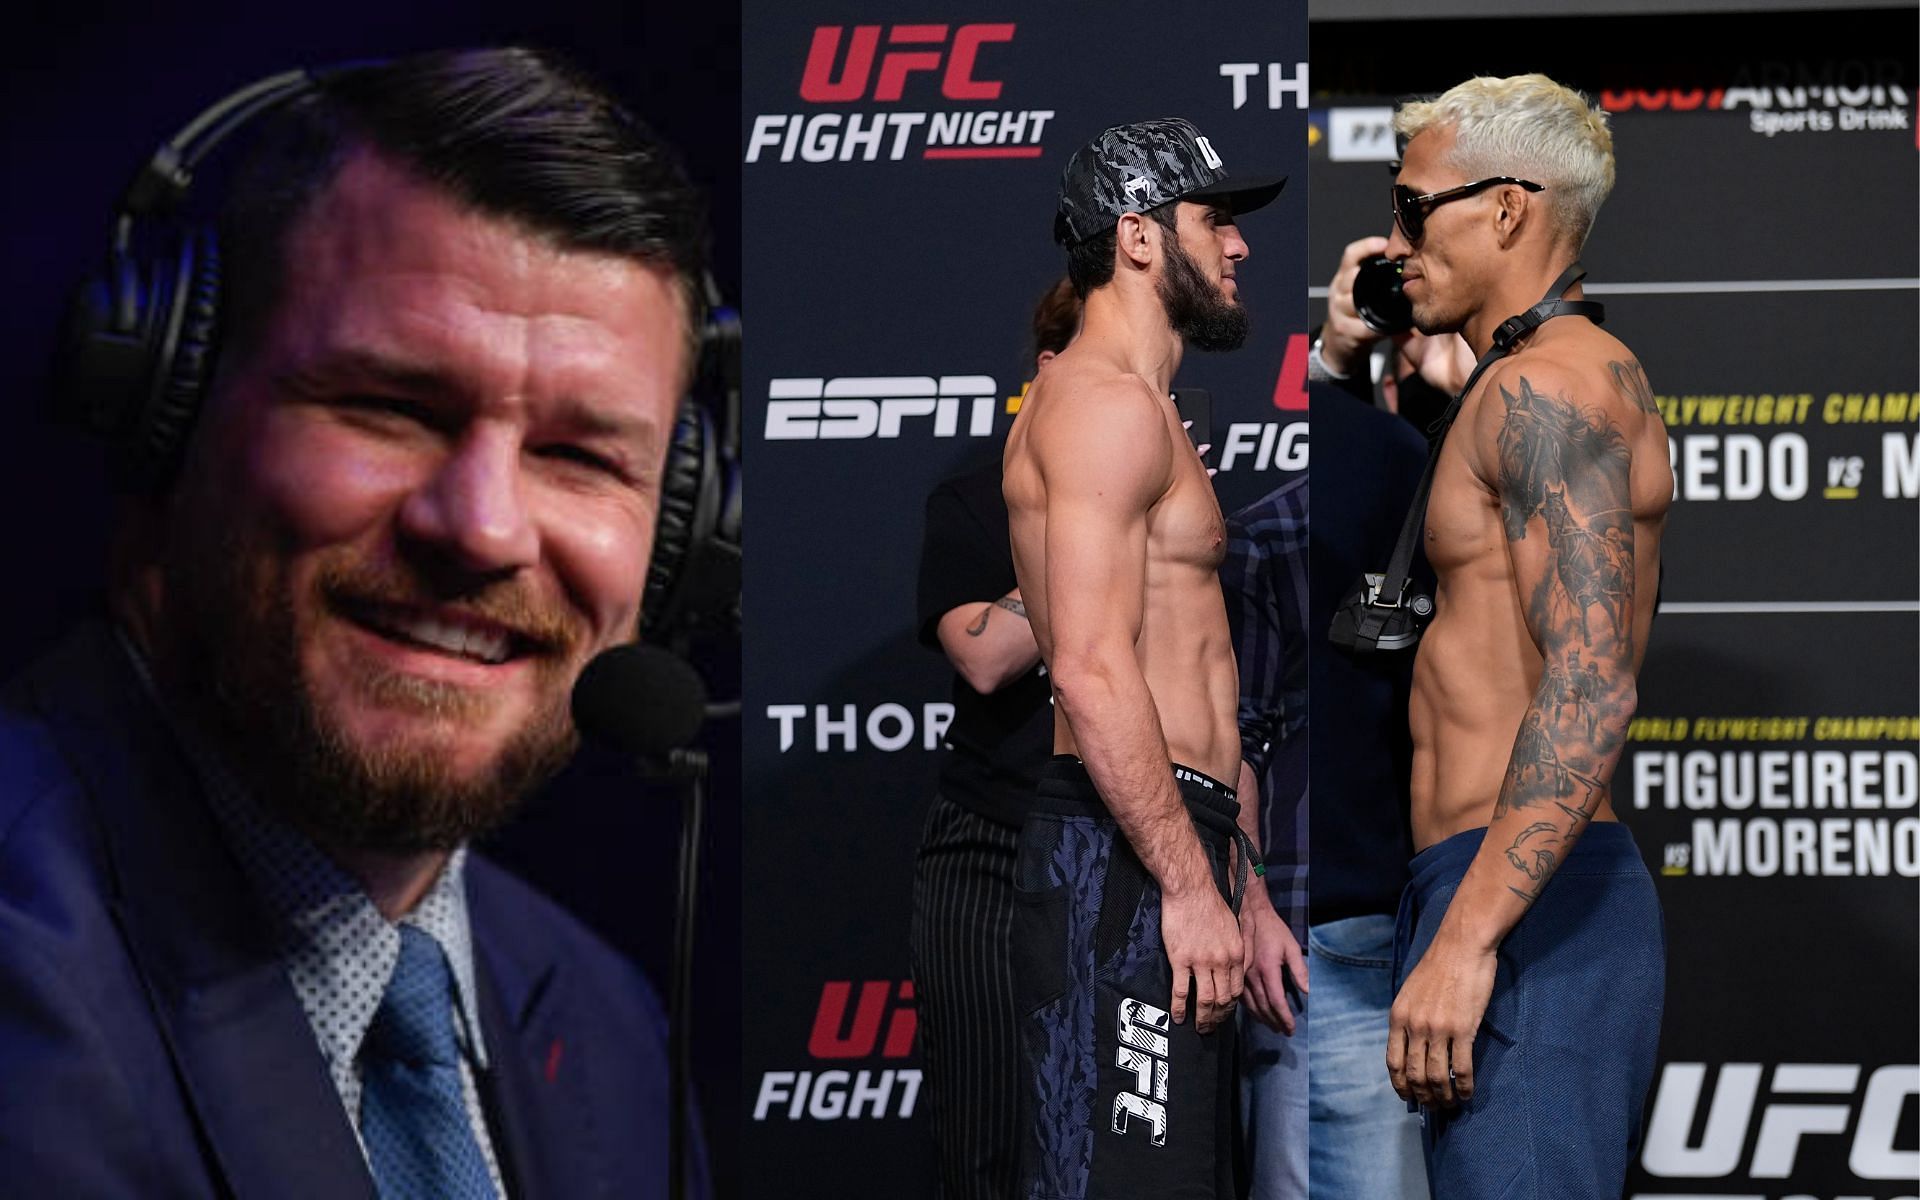 From left to right: Michael Bisping, Islam Makhachev, and Charles Oliveira